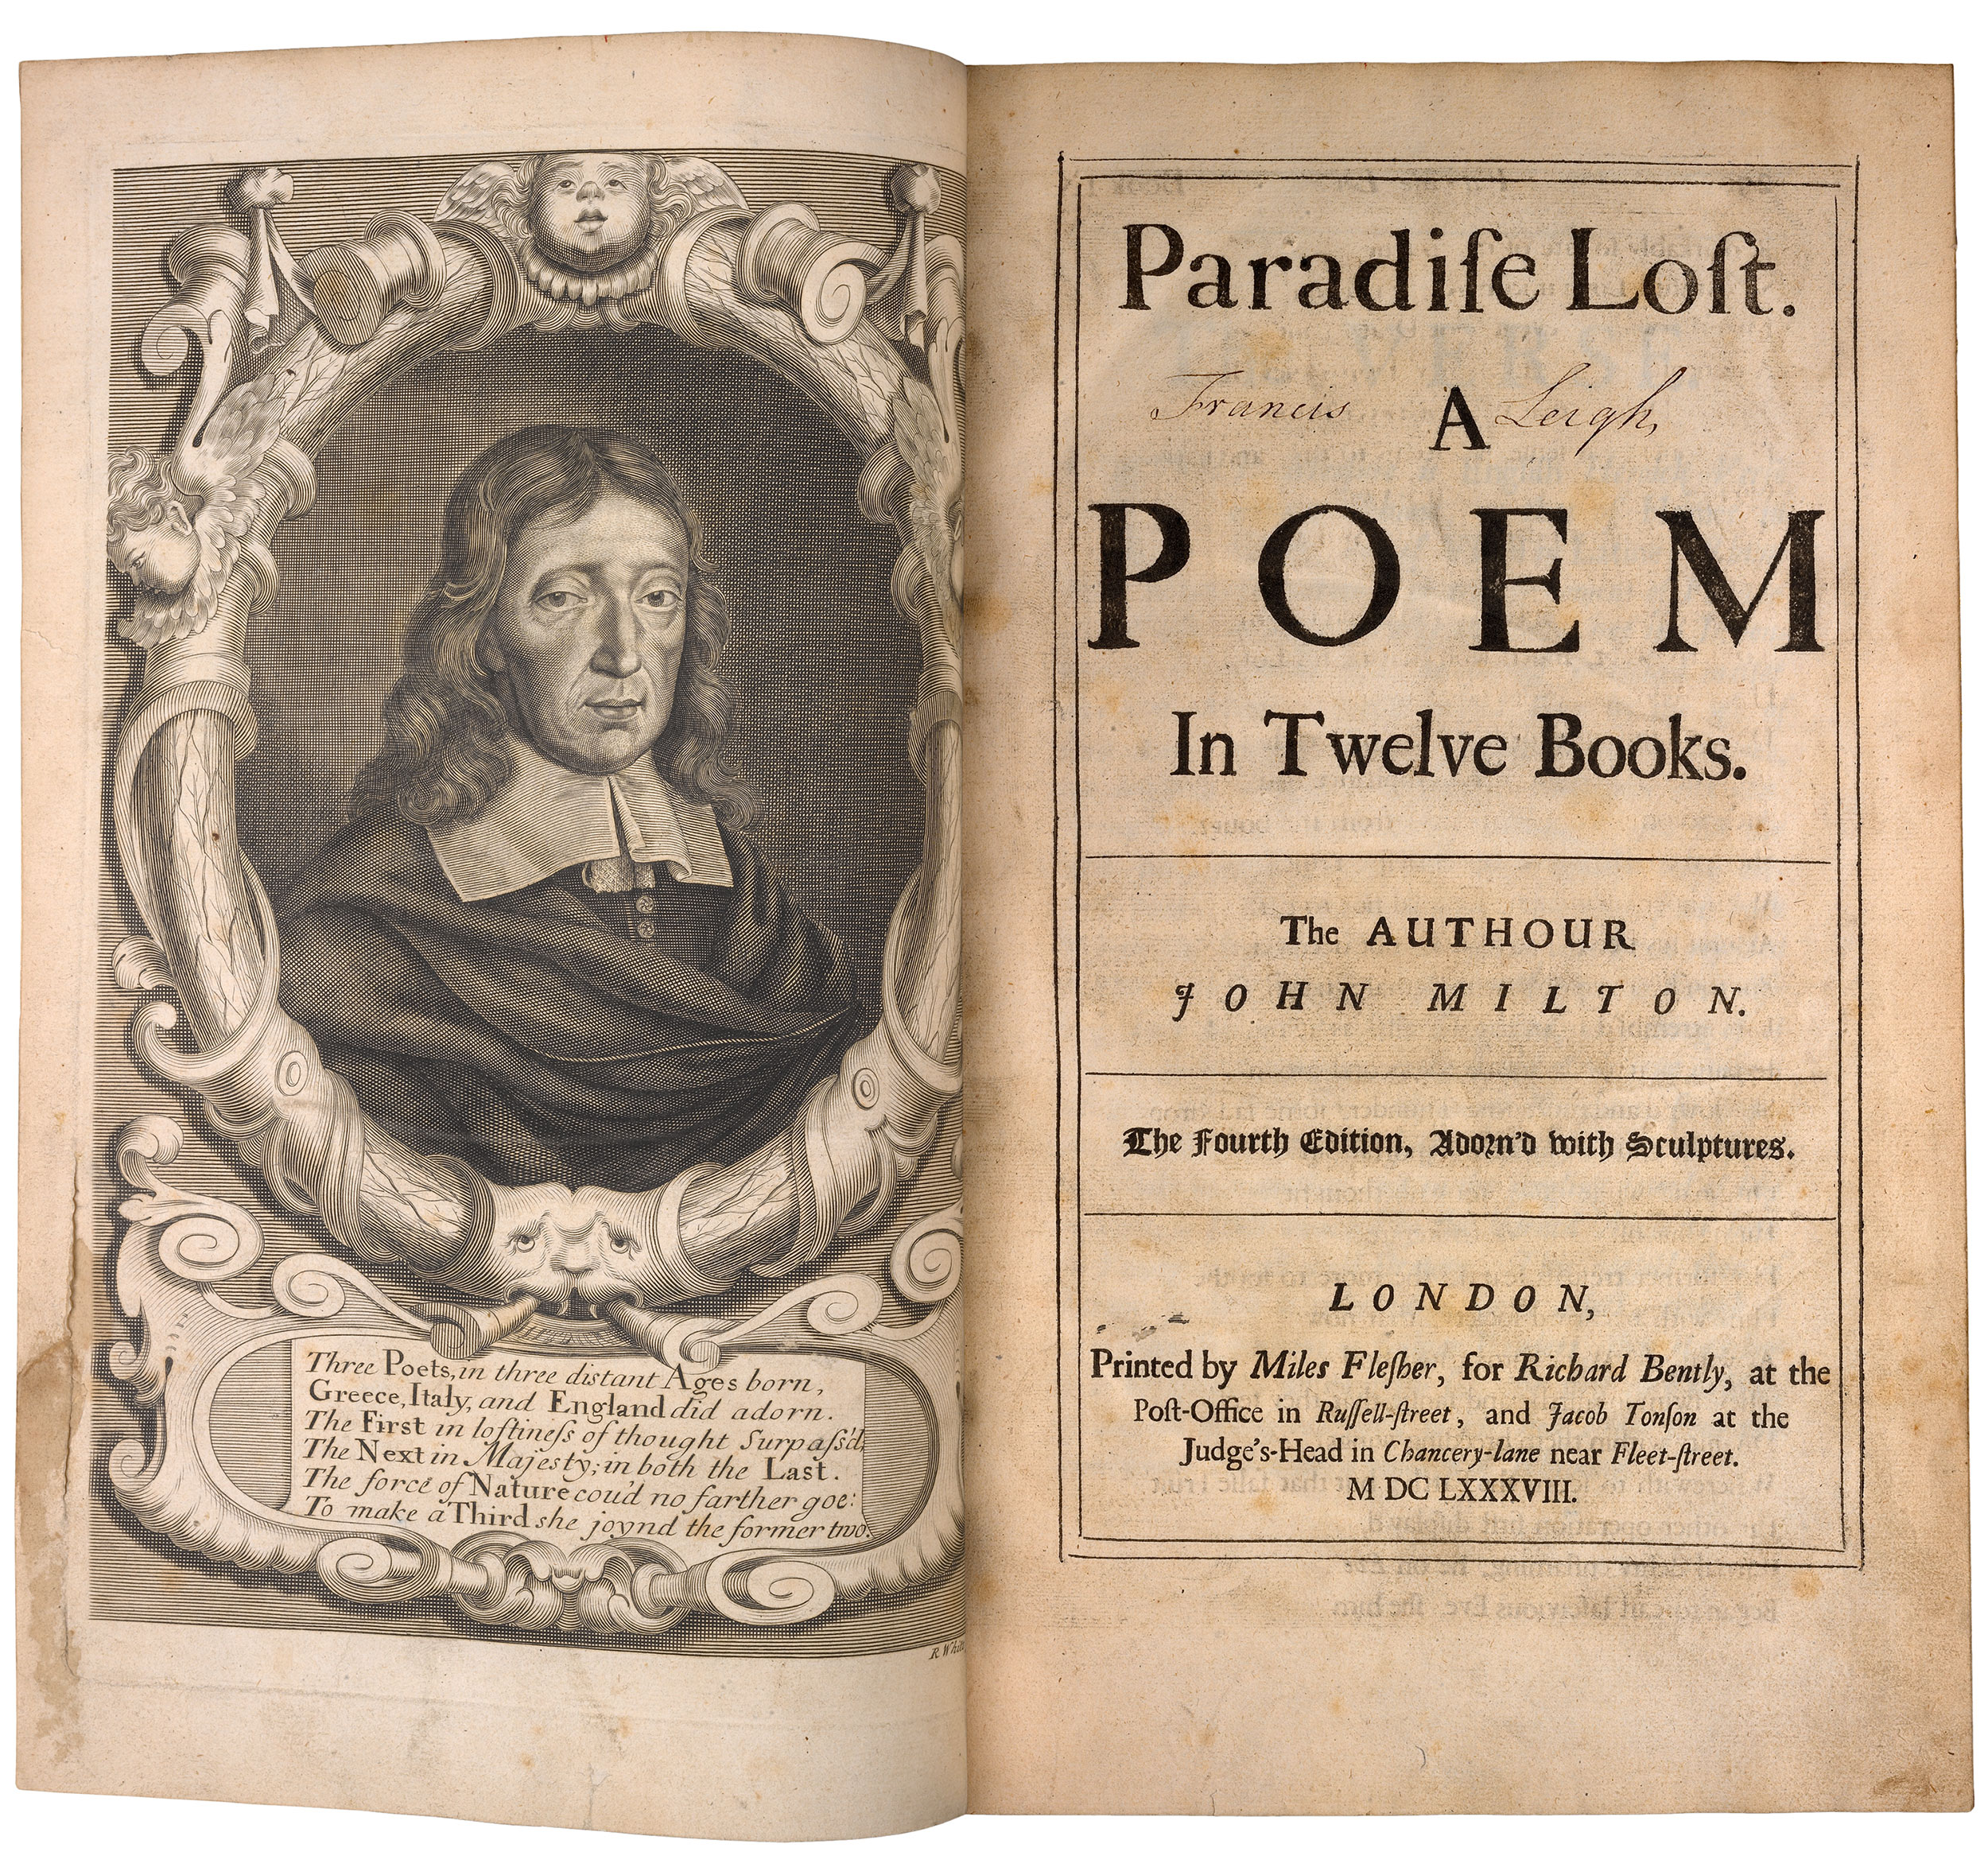 British Library - John Milton's epic poem Paradise Lost was first published  in 1667. Originally written as 10 books, Milton reworked it as 12,  following the model of Virgil's Aeneid. In the